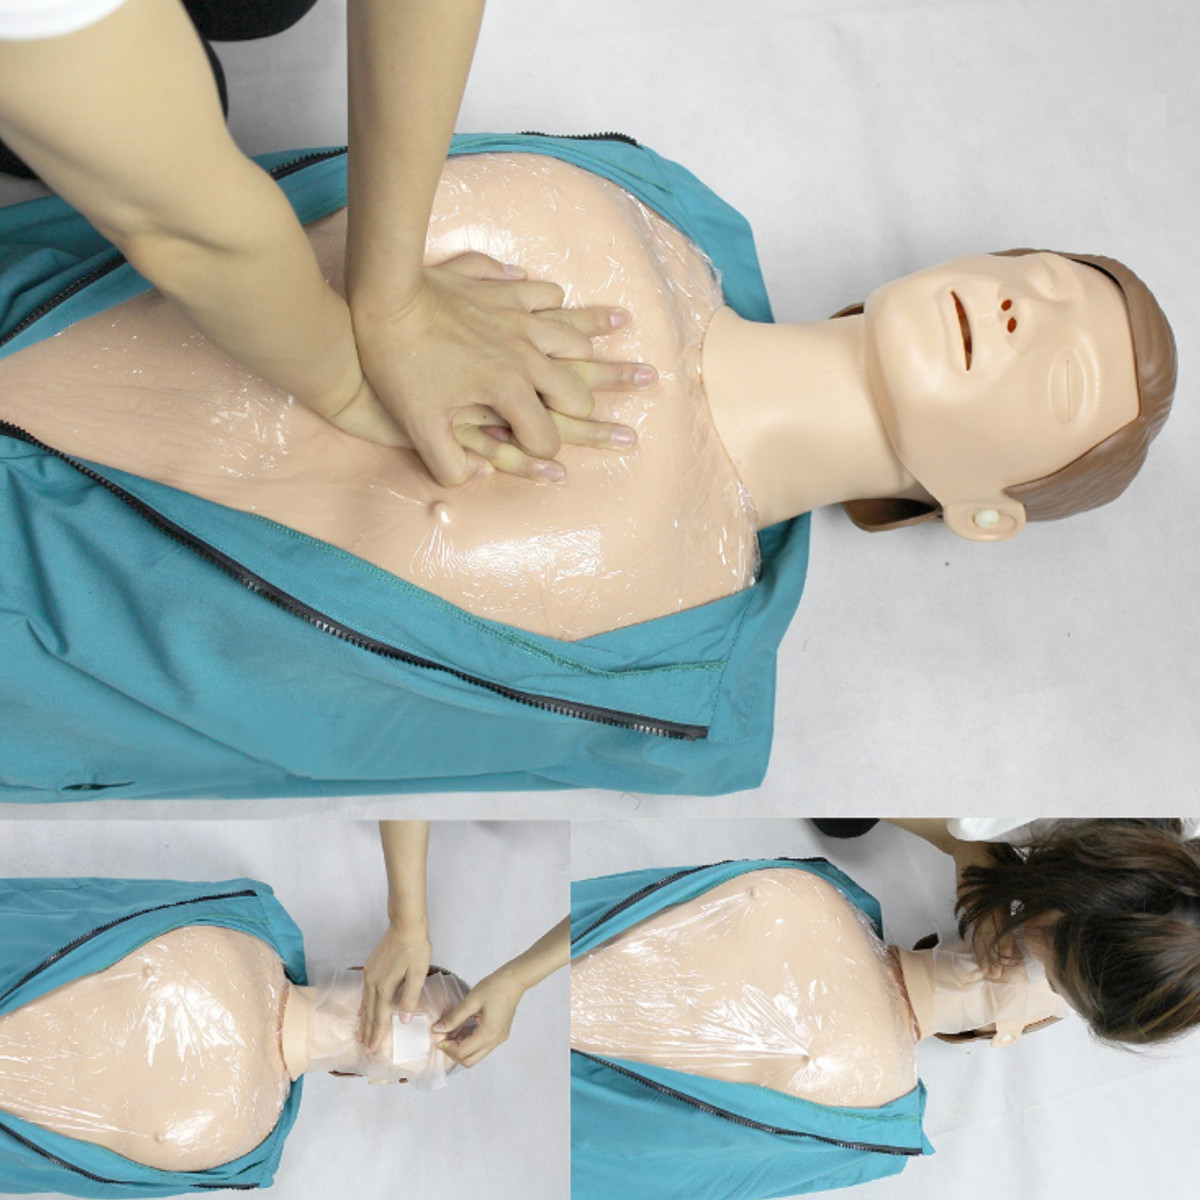 CPR Adult Manikin AED First Aid Training Dummy Training Medical Model Respiration Human 12